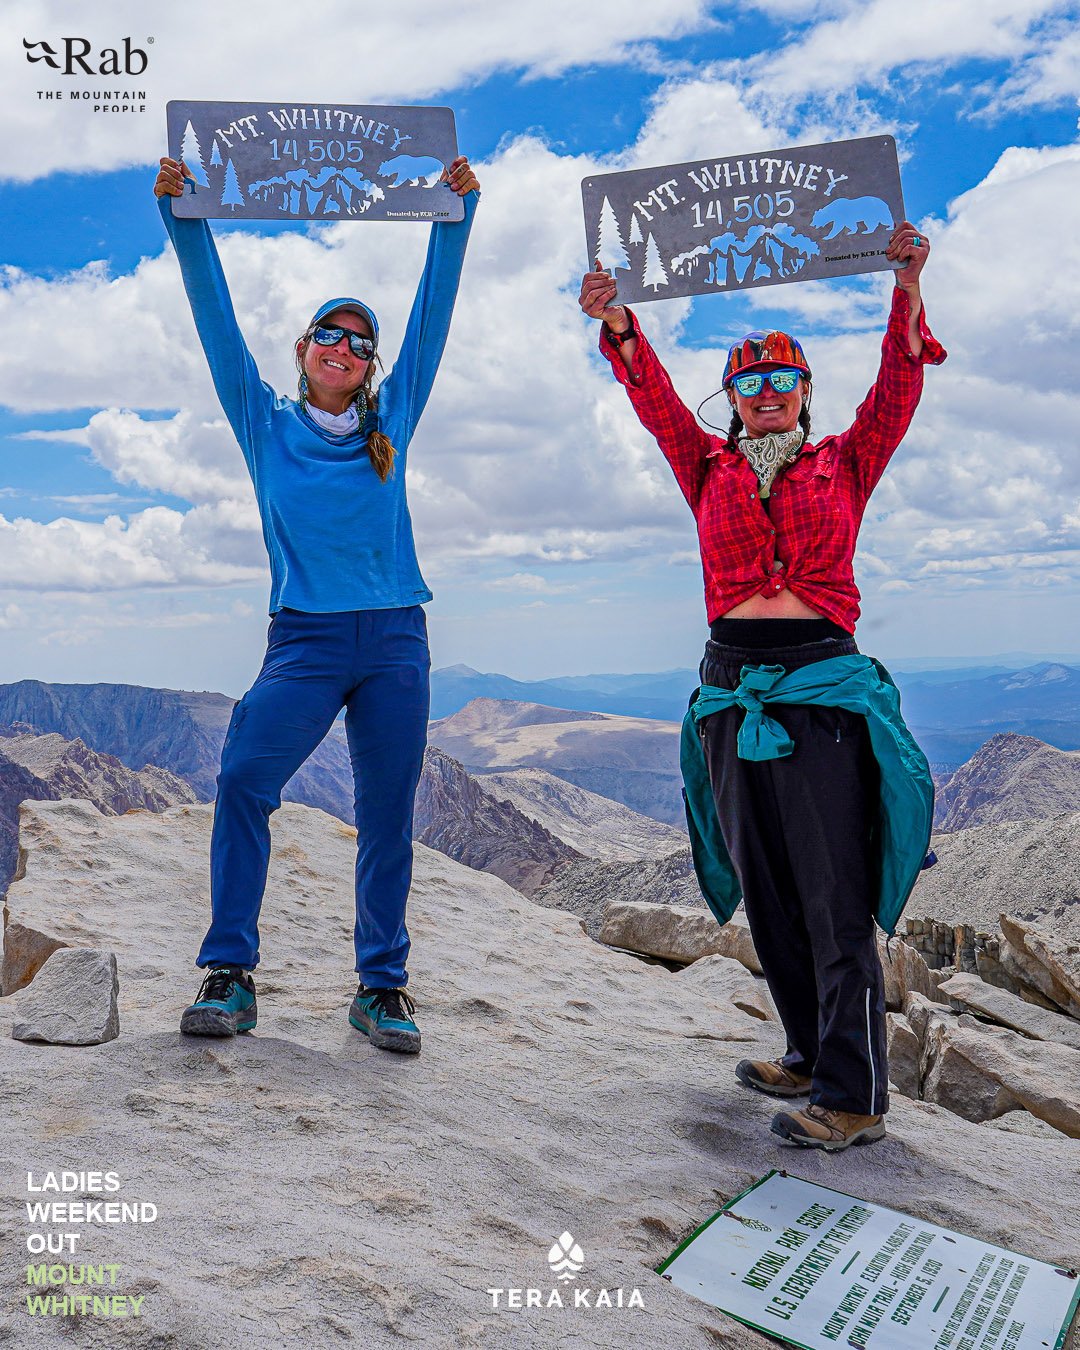 Ladies Weekend Out Mount Whitney Backpacking